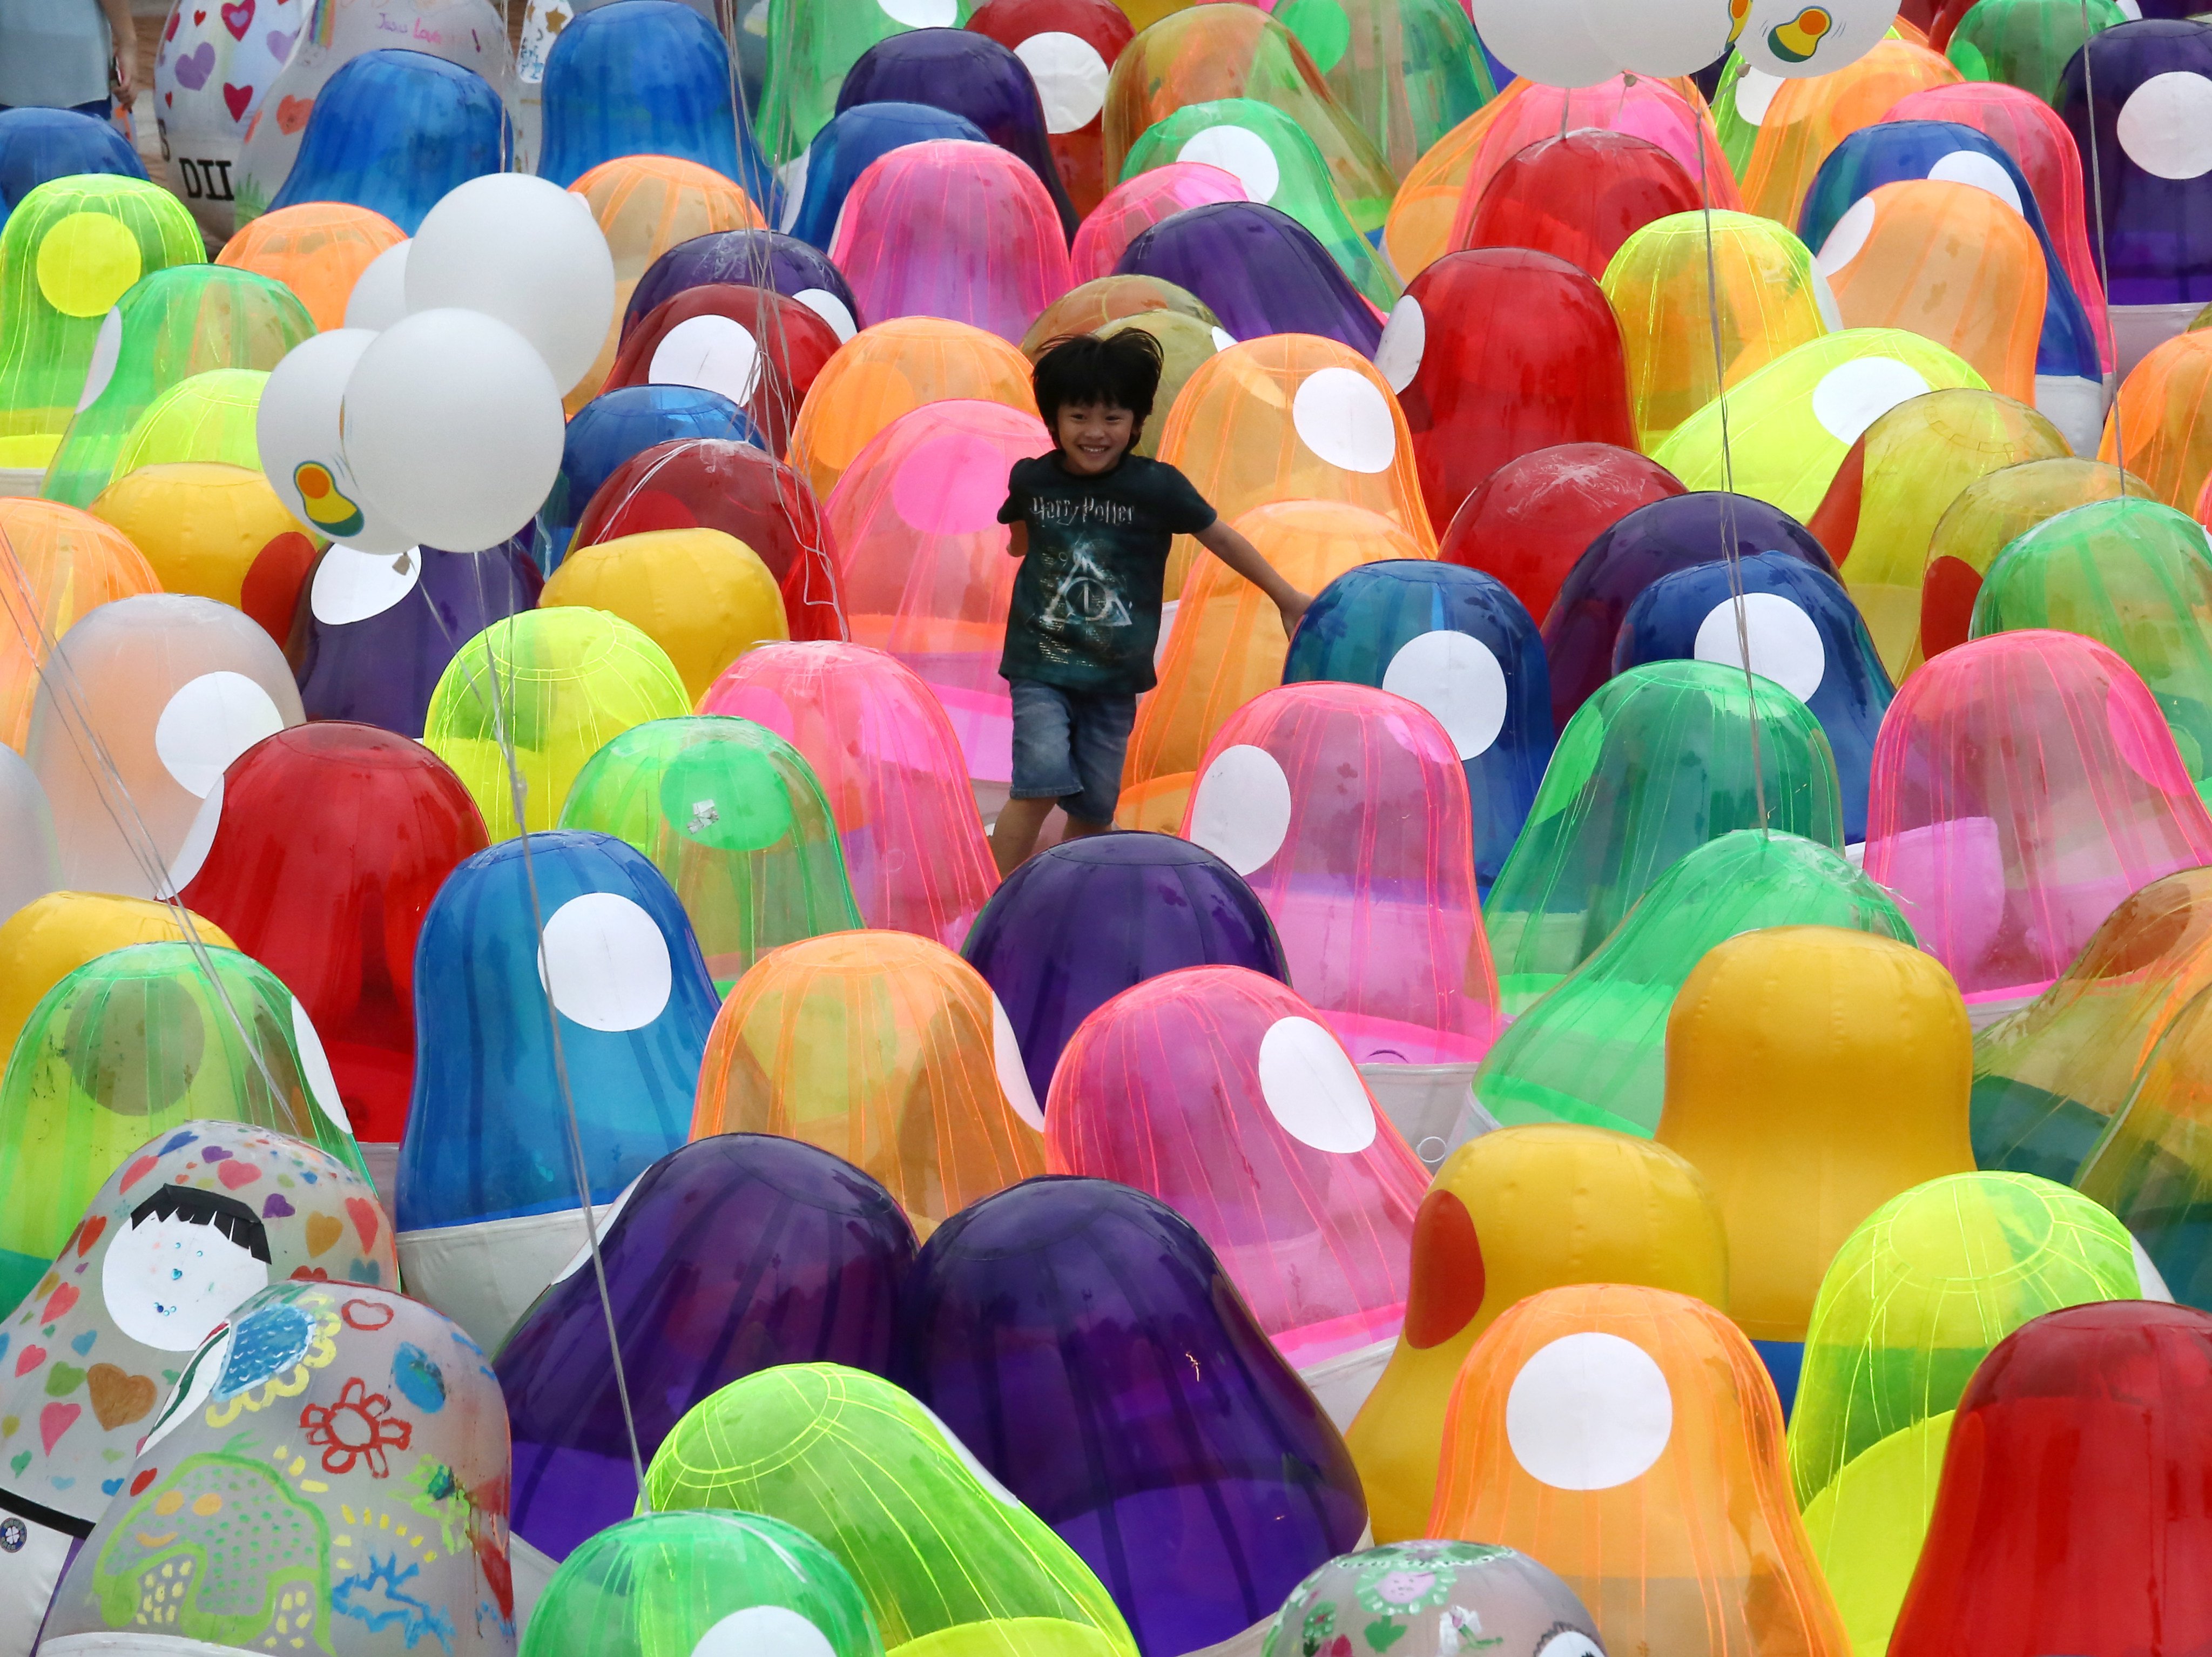 A child plays among Roly-poly toys at Kowloon Park in Tsim Sha Tsui on April 27, 2019, as part of a display meant to raise public awareness of students’ mental health. Photo: Jonathan Wong